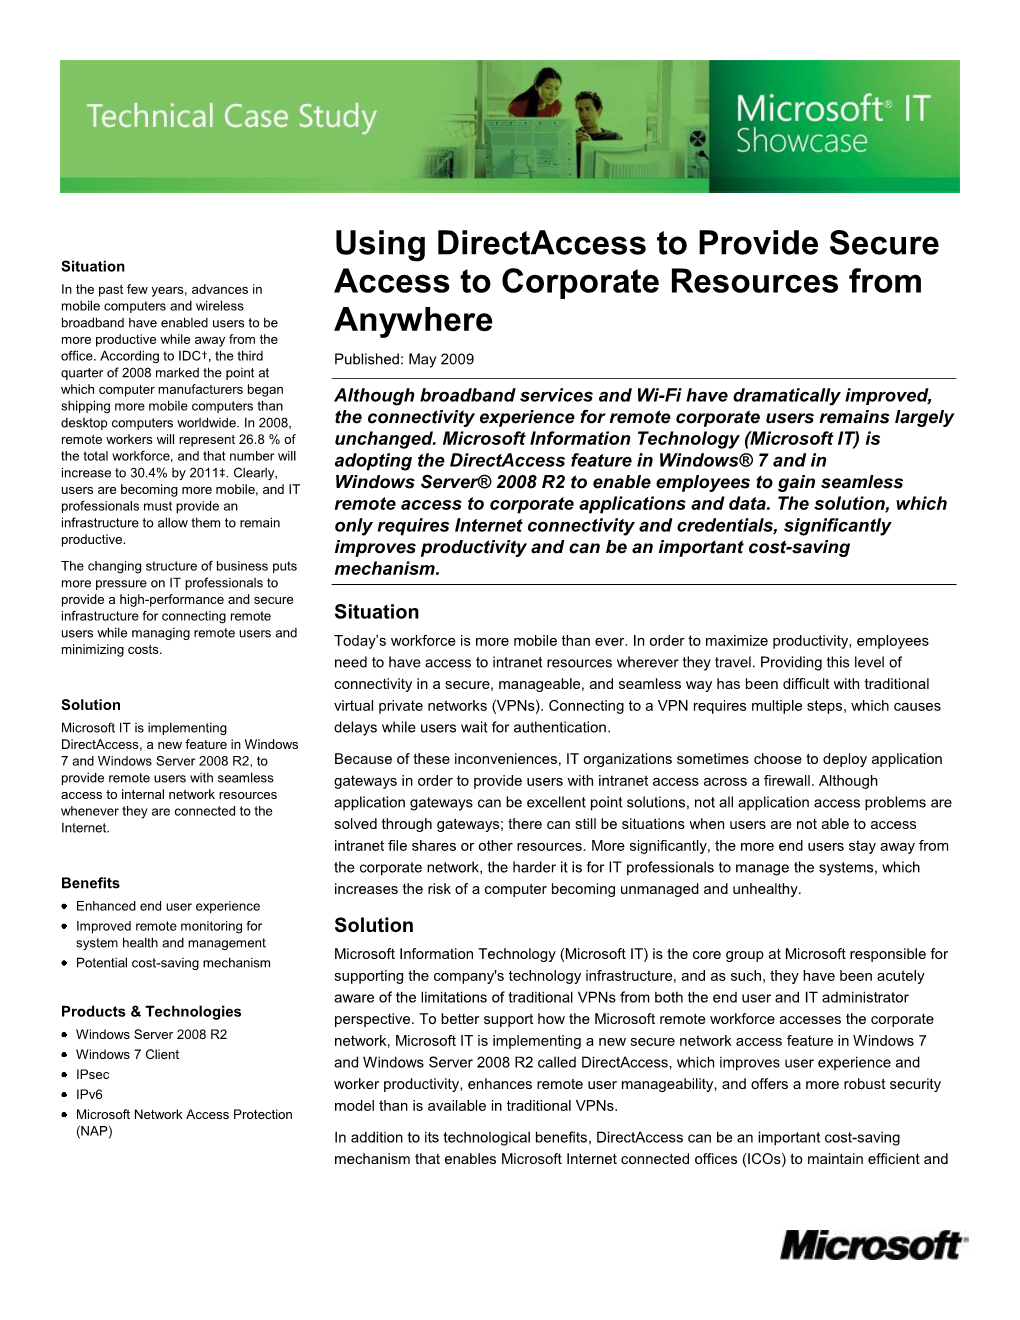 Using Directaccess to Provide Secure Access to Corporate Resources from Anywhere